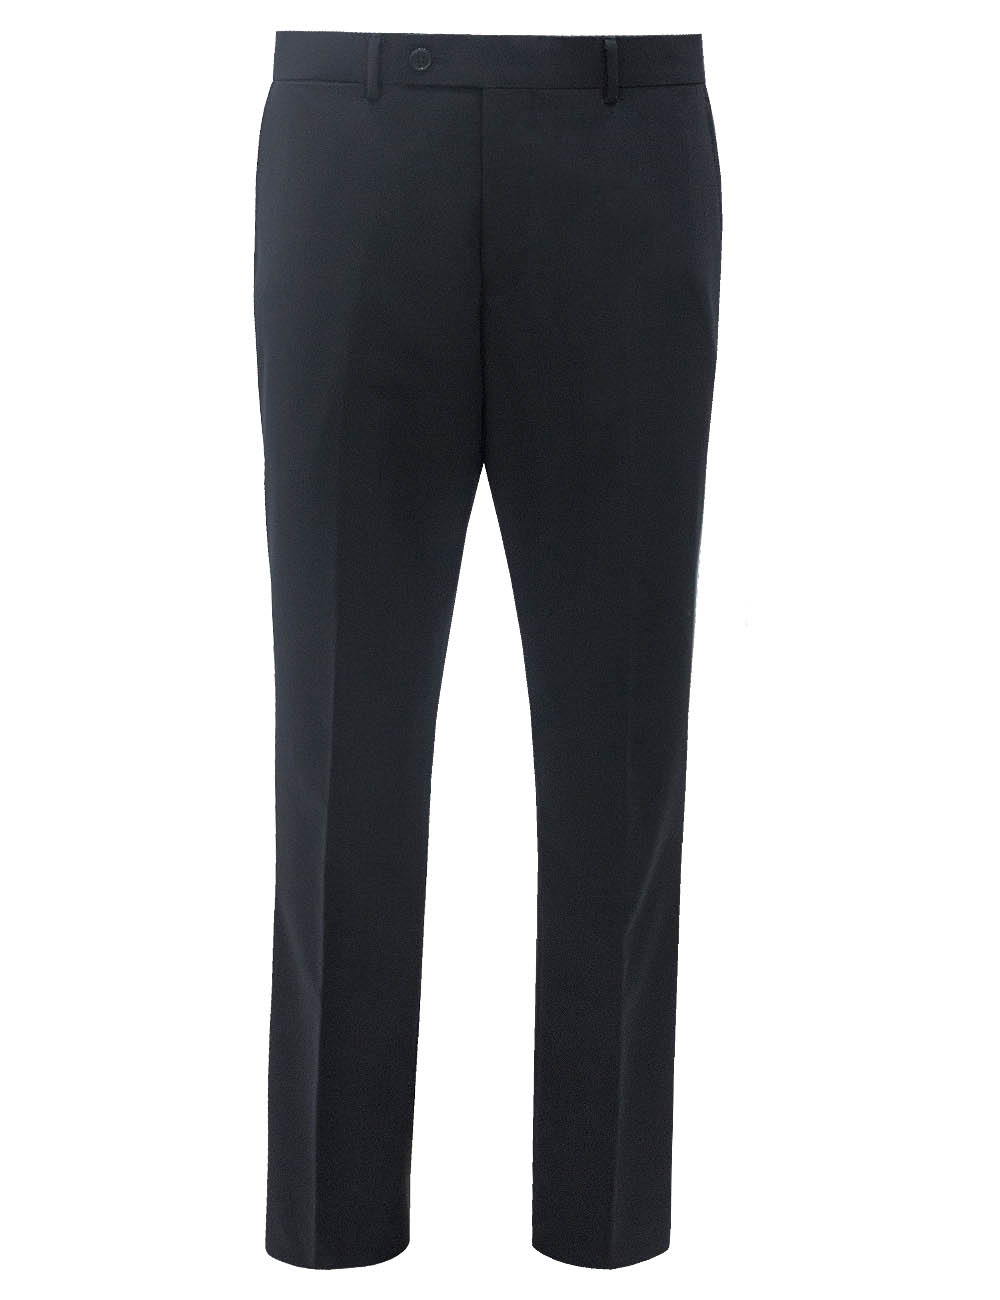 Black Twill Slim / Tailored Fit Suit Pants - SP1.5-SS1.5 - The